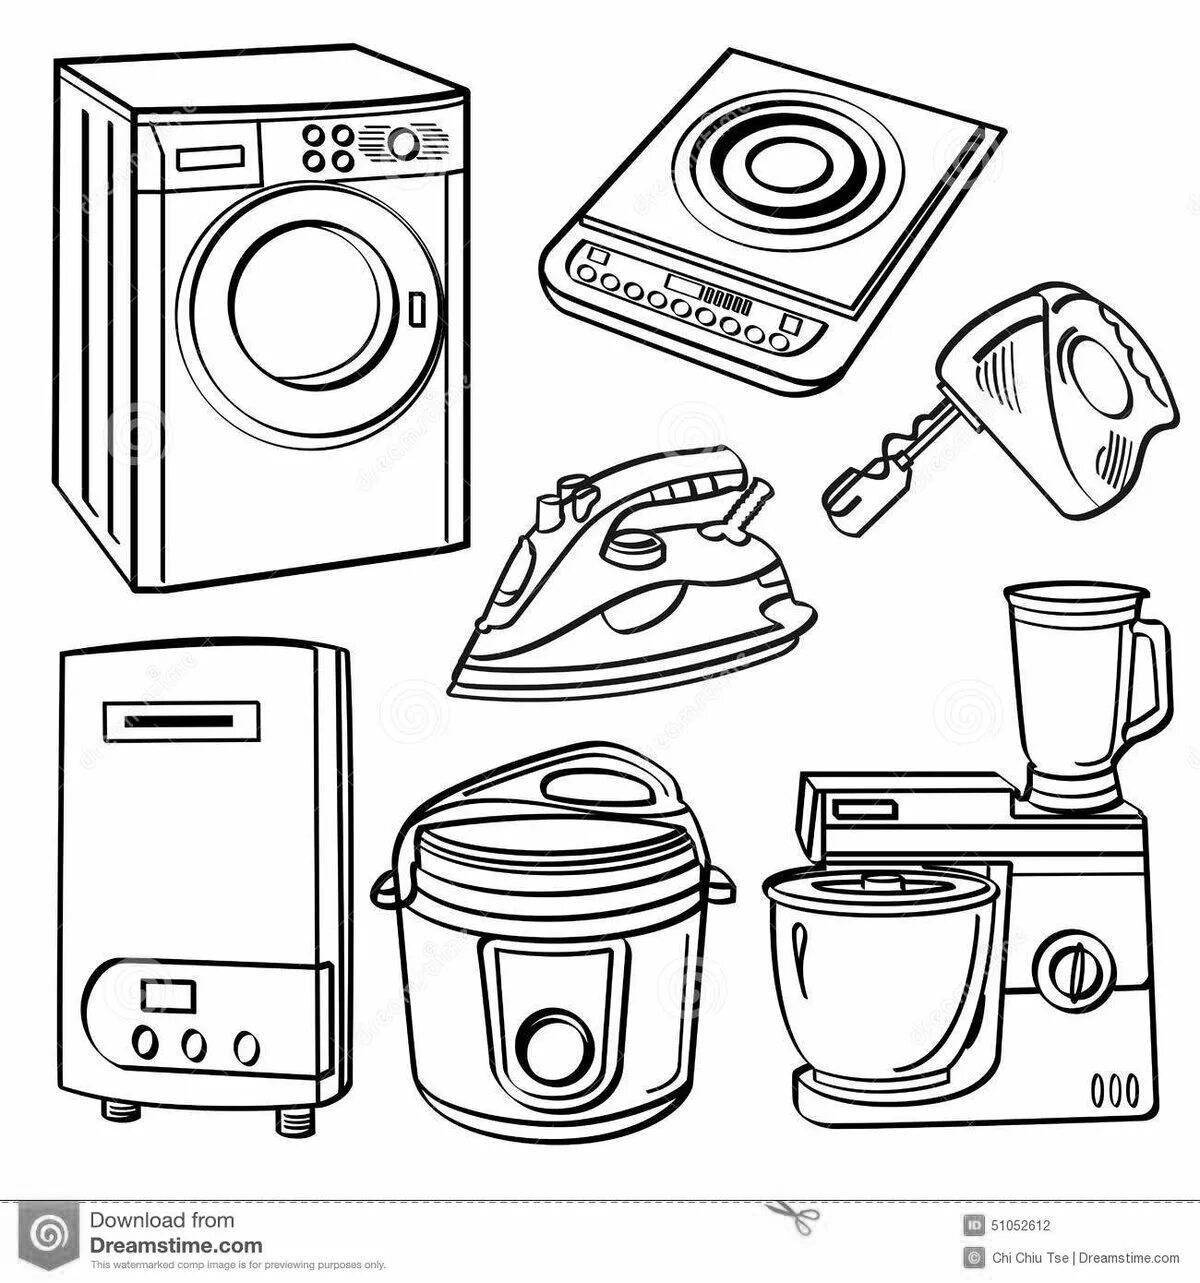 Coloring bright furniture household appliances